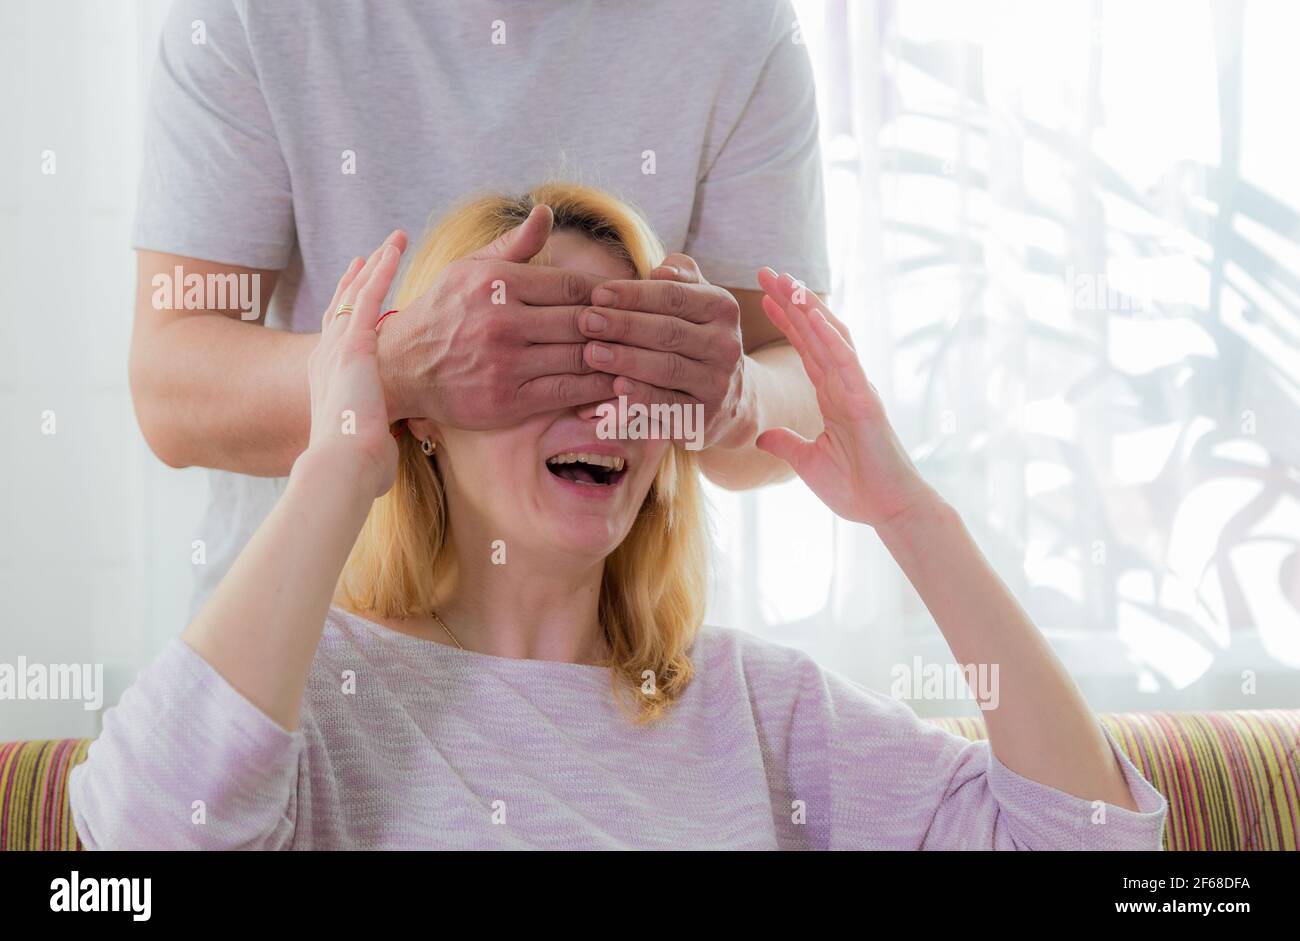 The family makes a surprise for mom, wishes her a happy holiday. Dad covered his mother's eyes with his palms. Stock Photo